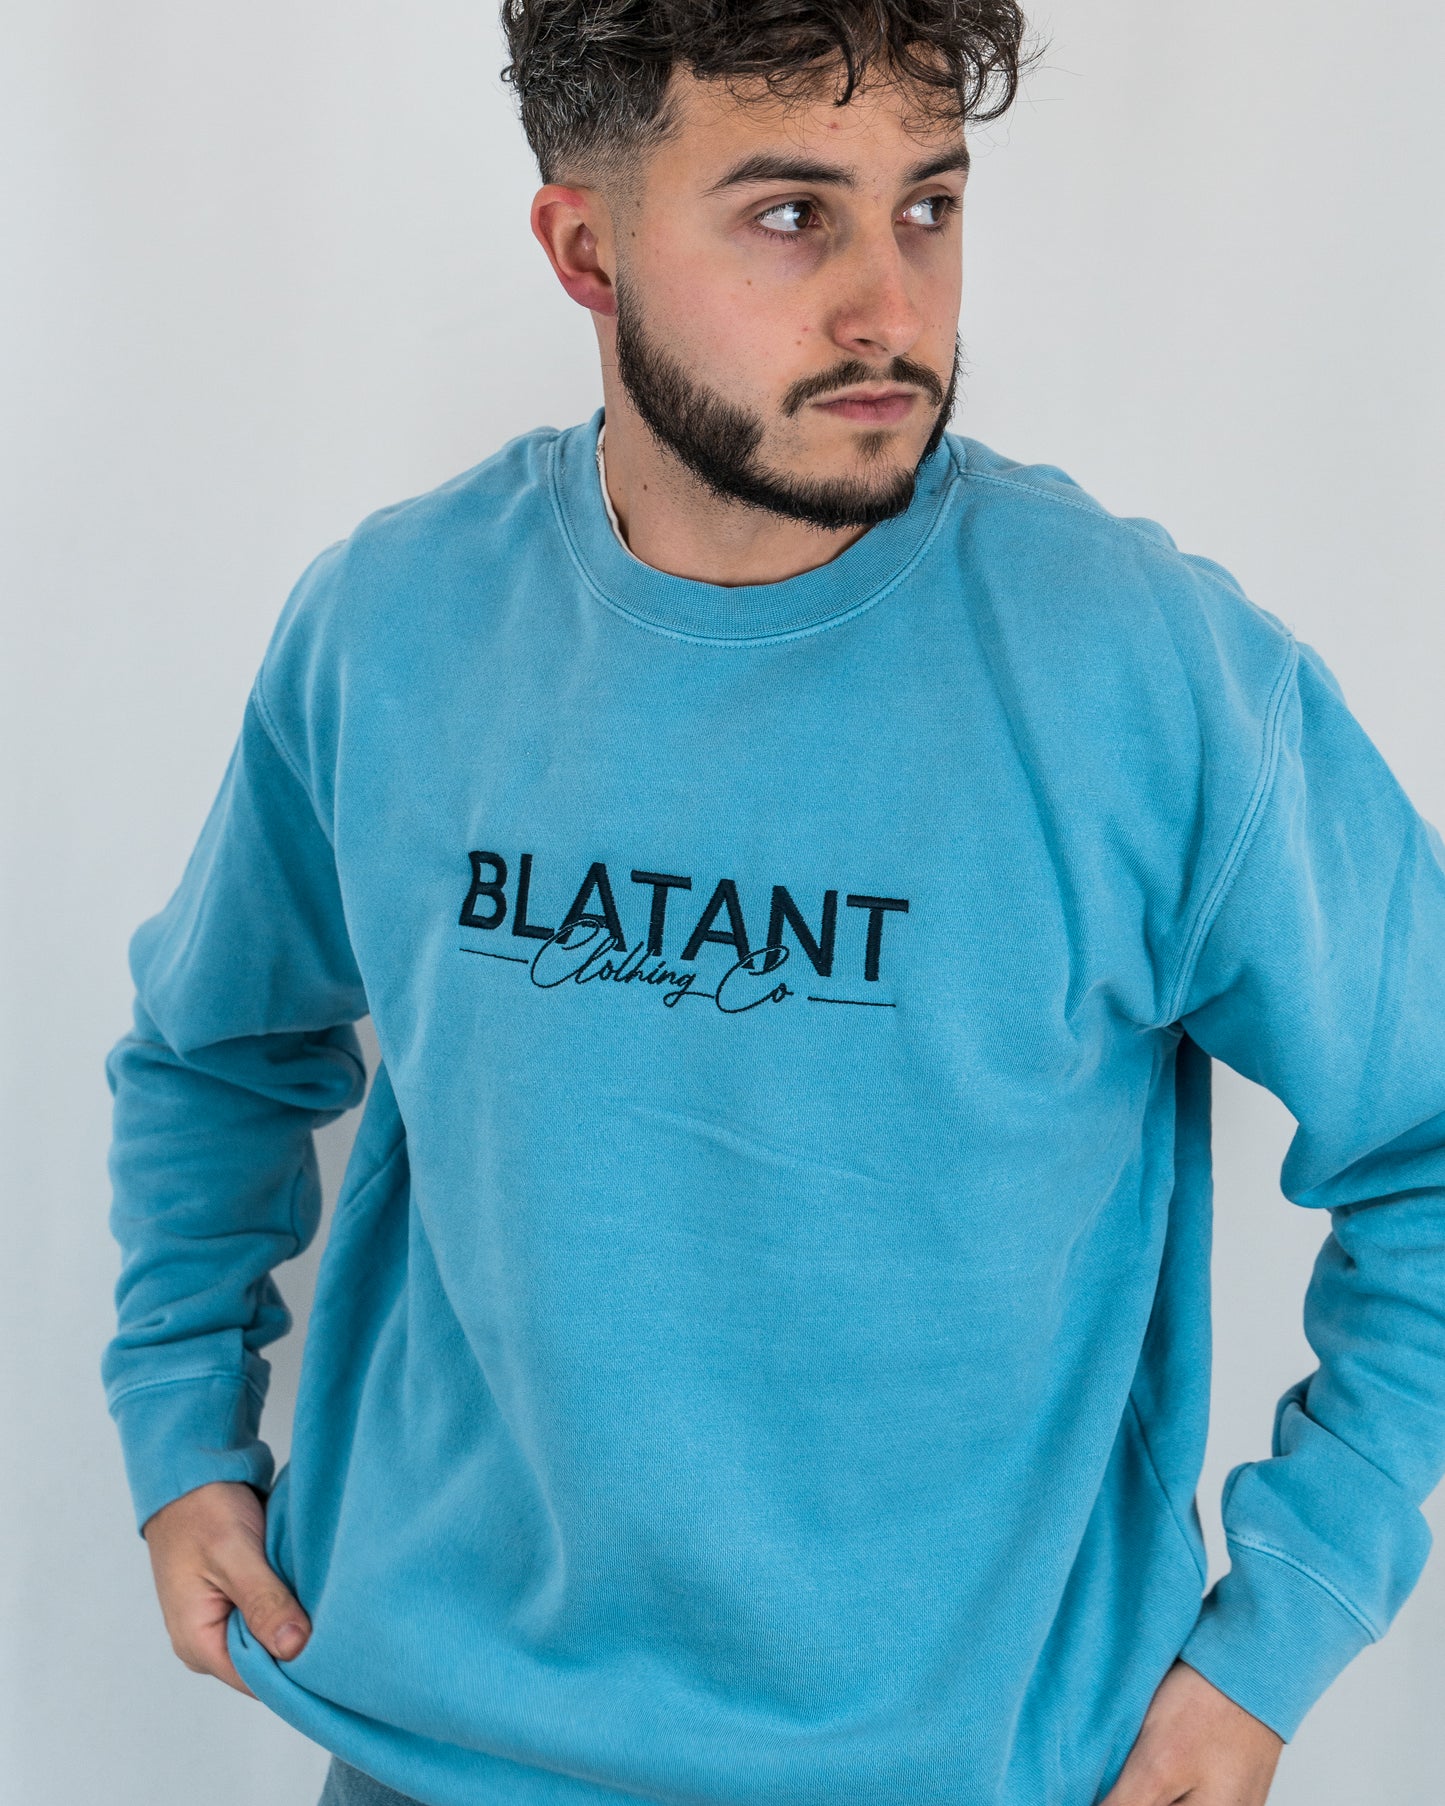 The Blatant Classic Embroidered Crew Neck